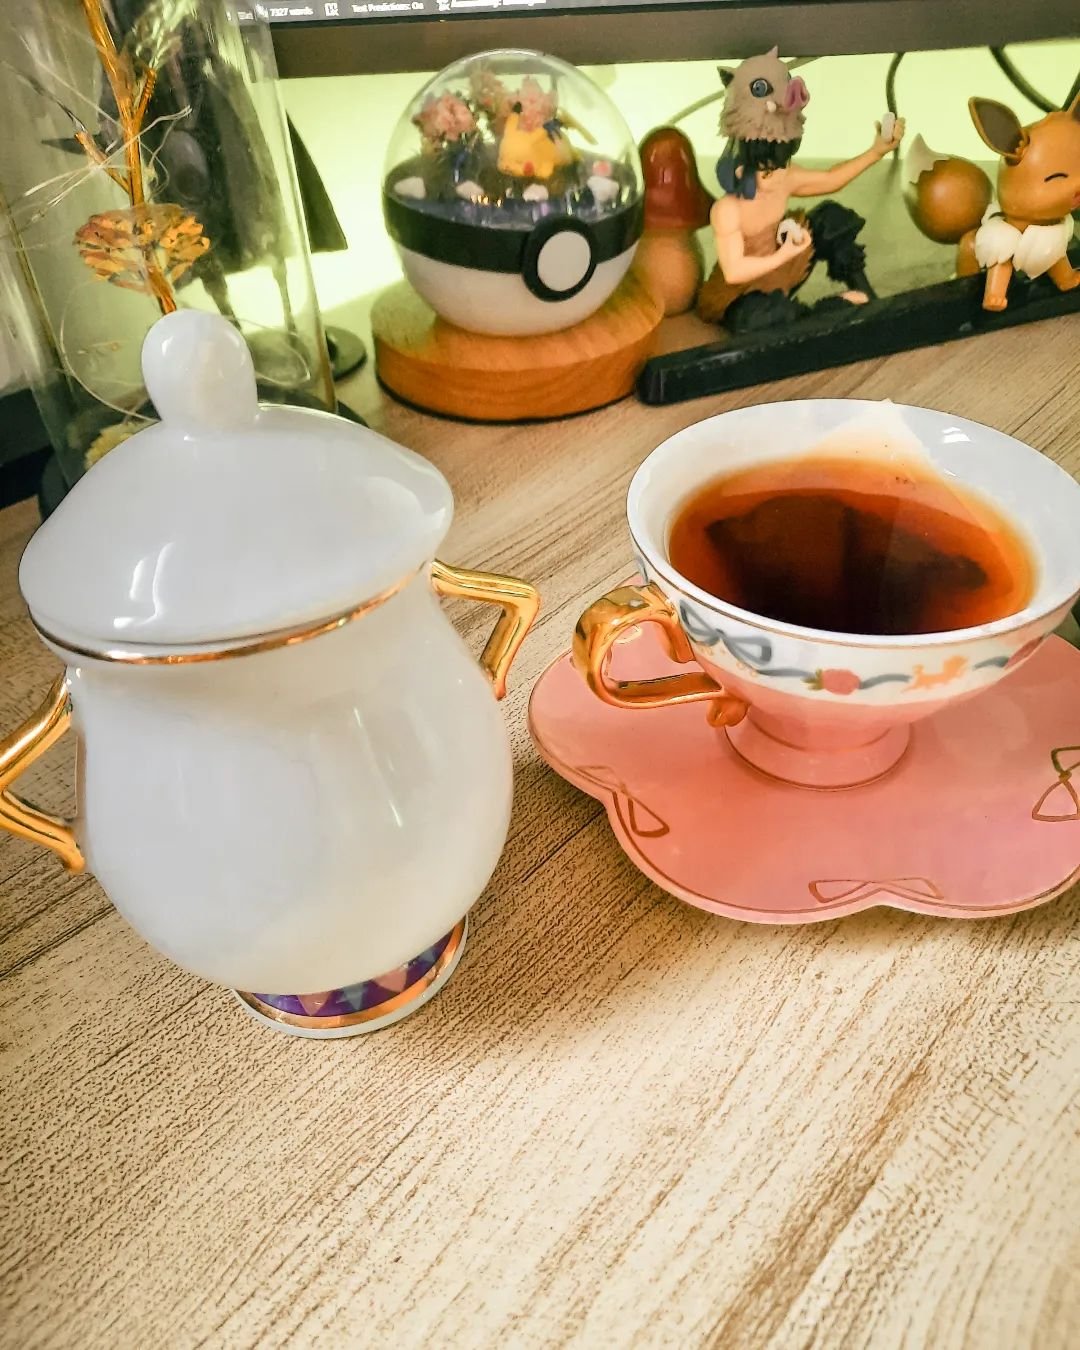 It's time for tea 🍵 💚

Sometimes I'm worried it'll be impossible for me to market myself and my books cause I mix aesthetics as much as I mix genres lol

It's gotta be an adhd thing.

Also fun fact: this is an old pic, cause I'm really sick with al